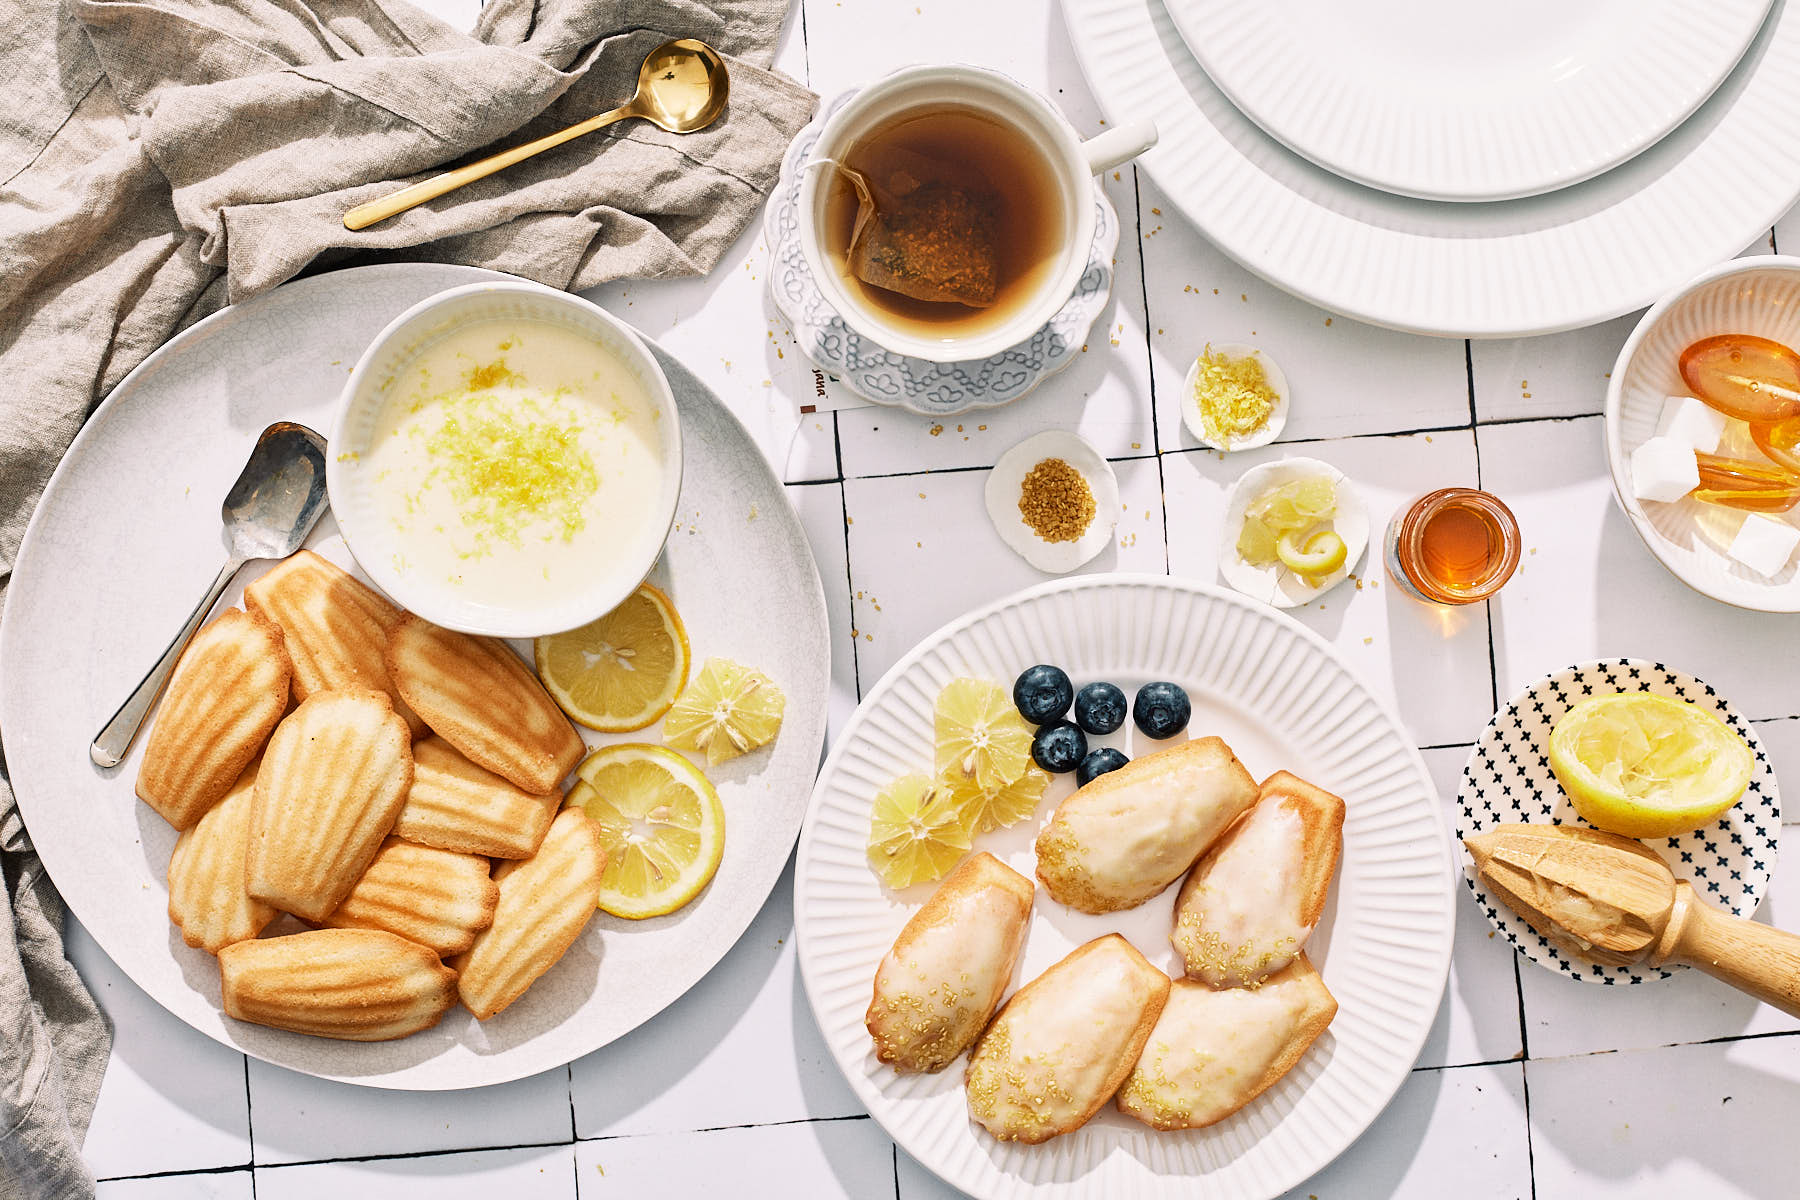 Flat lay image of madeleine's on a plate with a cup of tea.